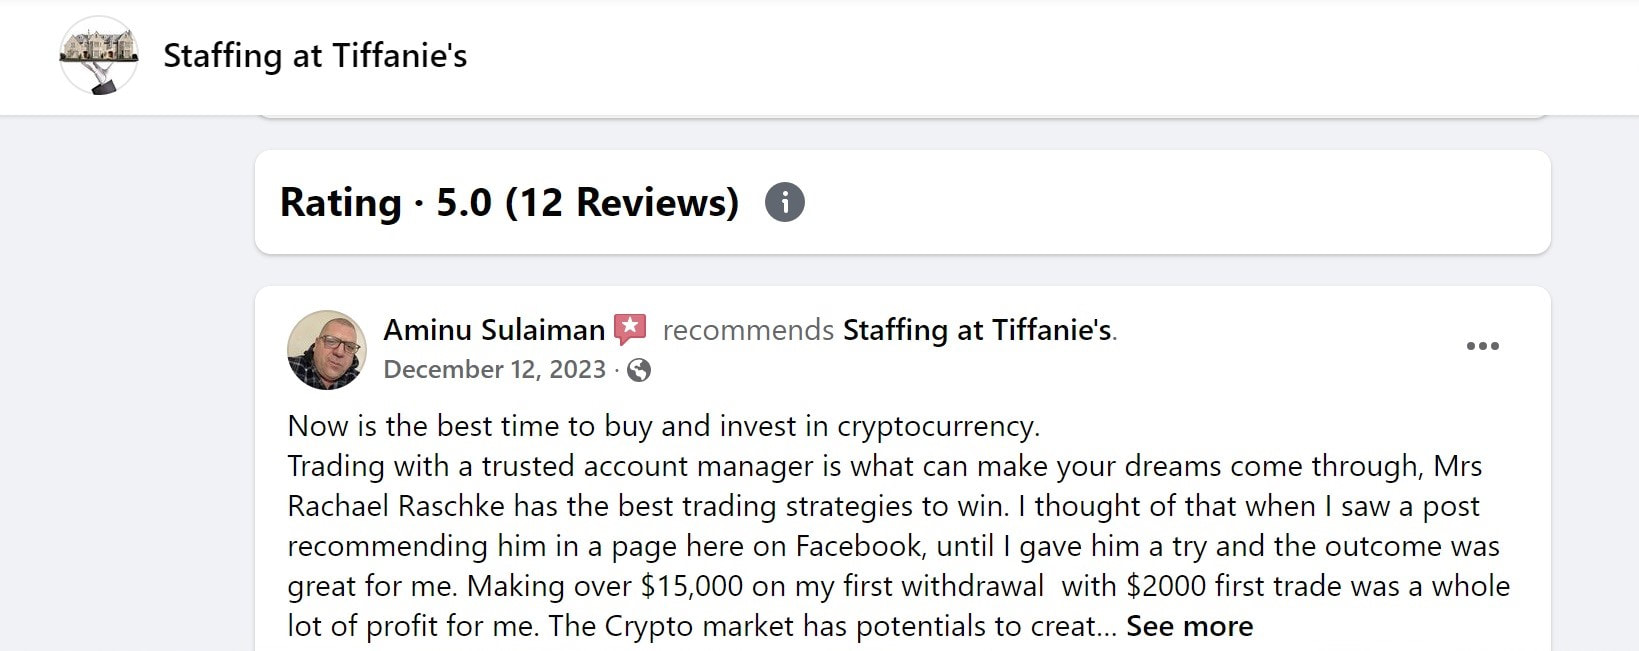 positive review of Staffing at Tiffanie's